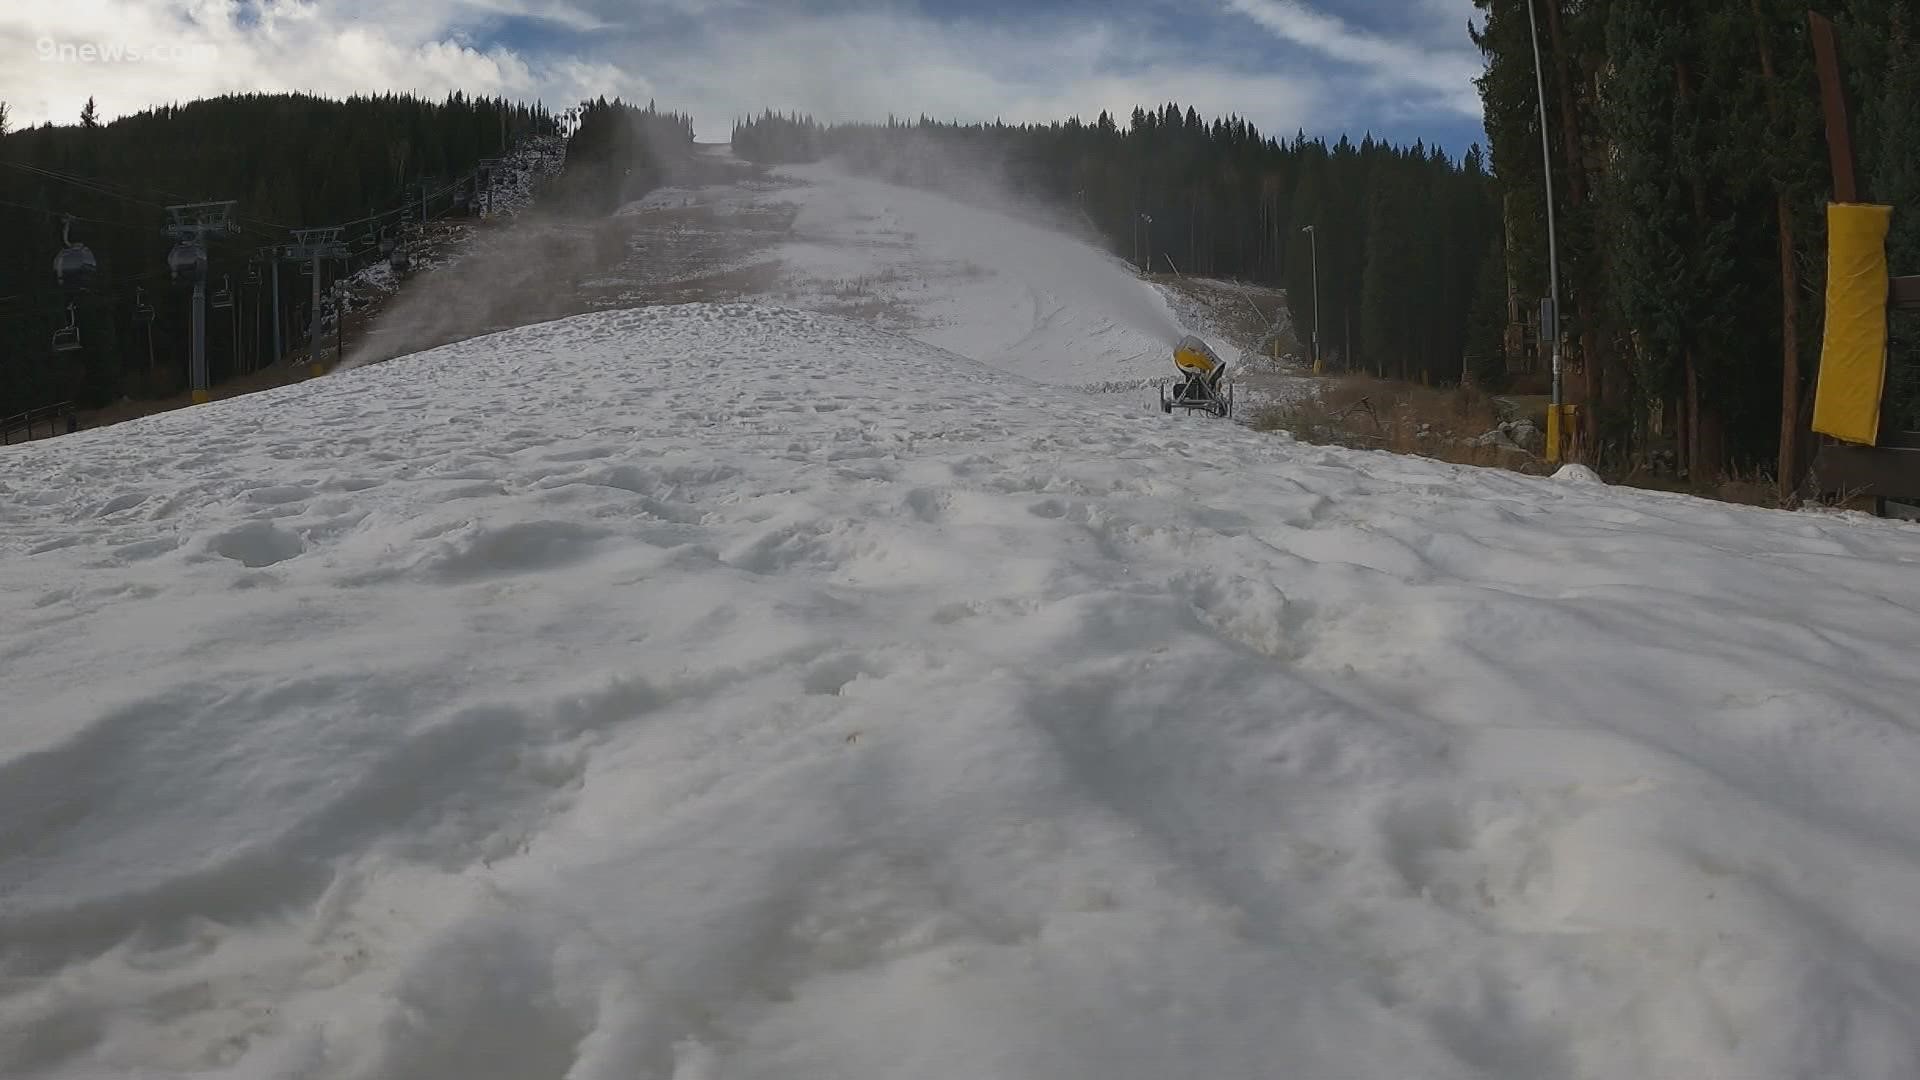 Keystone has one of the most state-of-the-art snowmaking systems around.